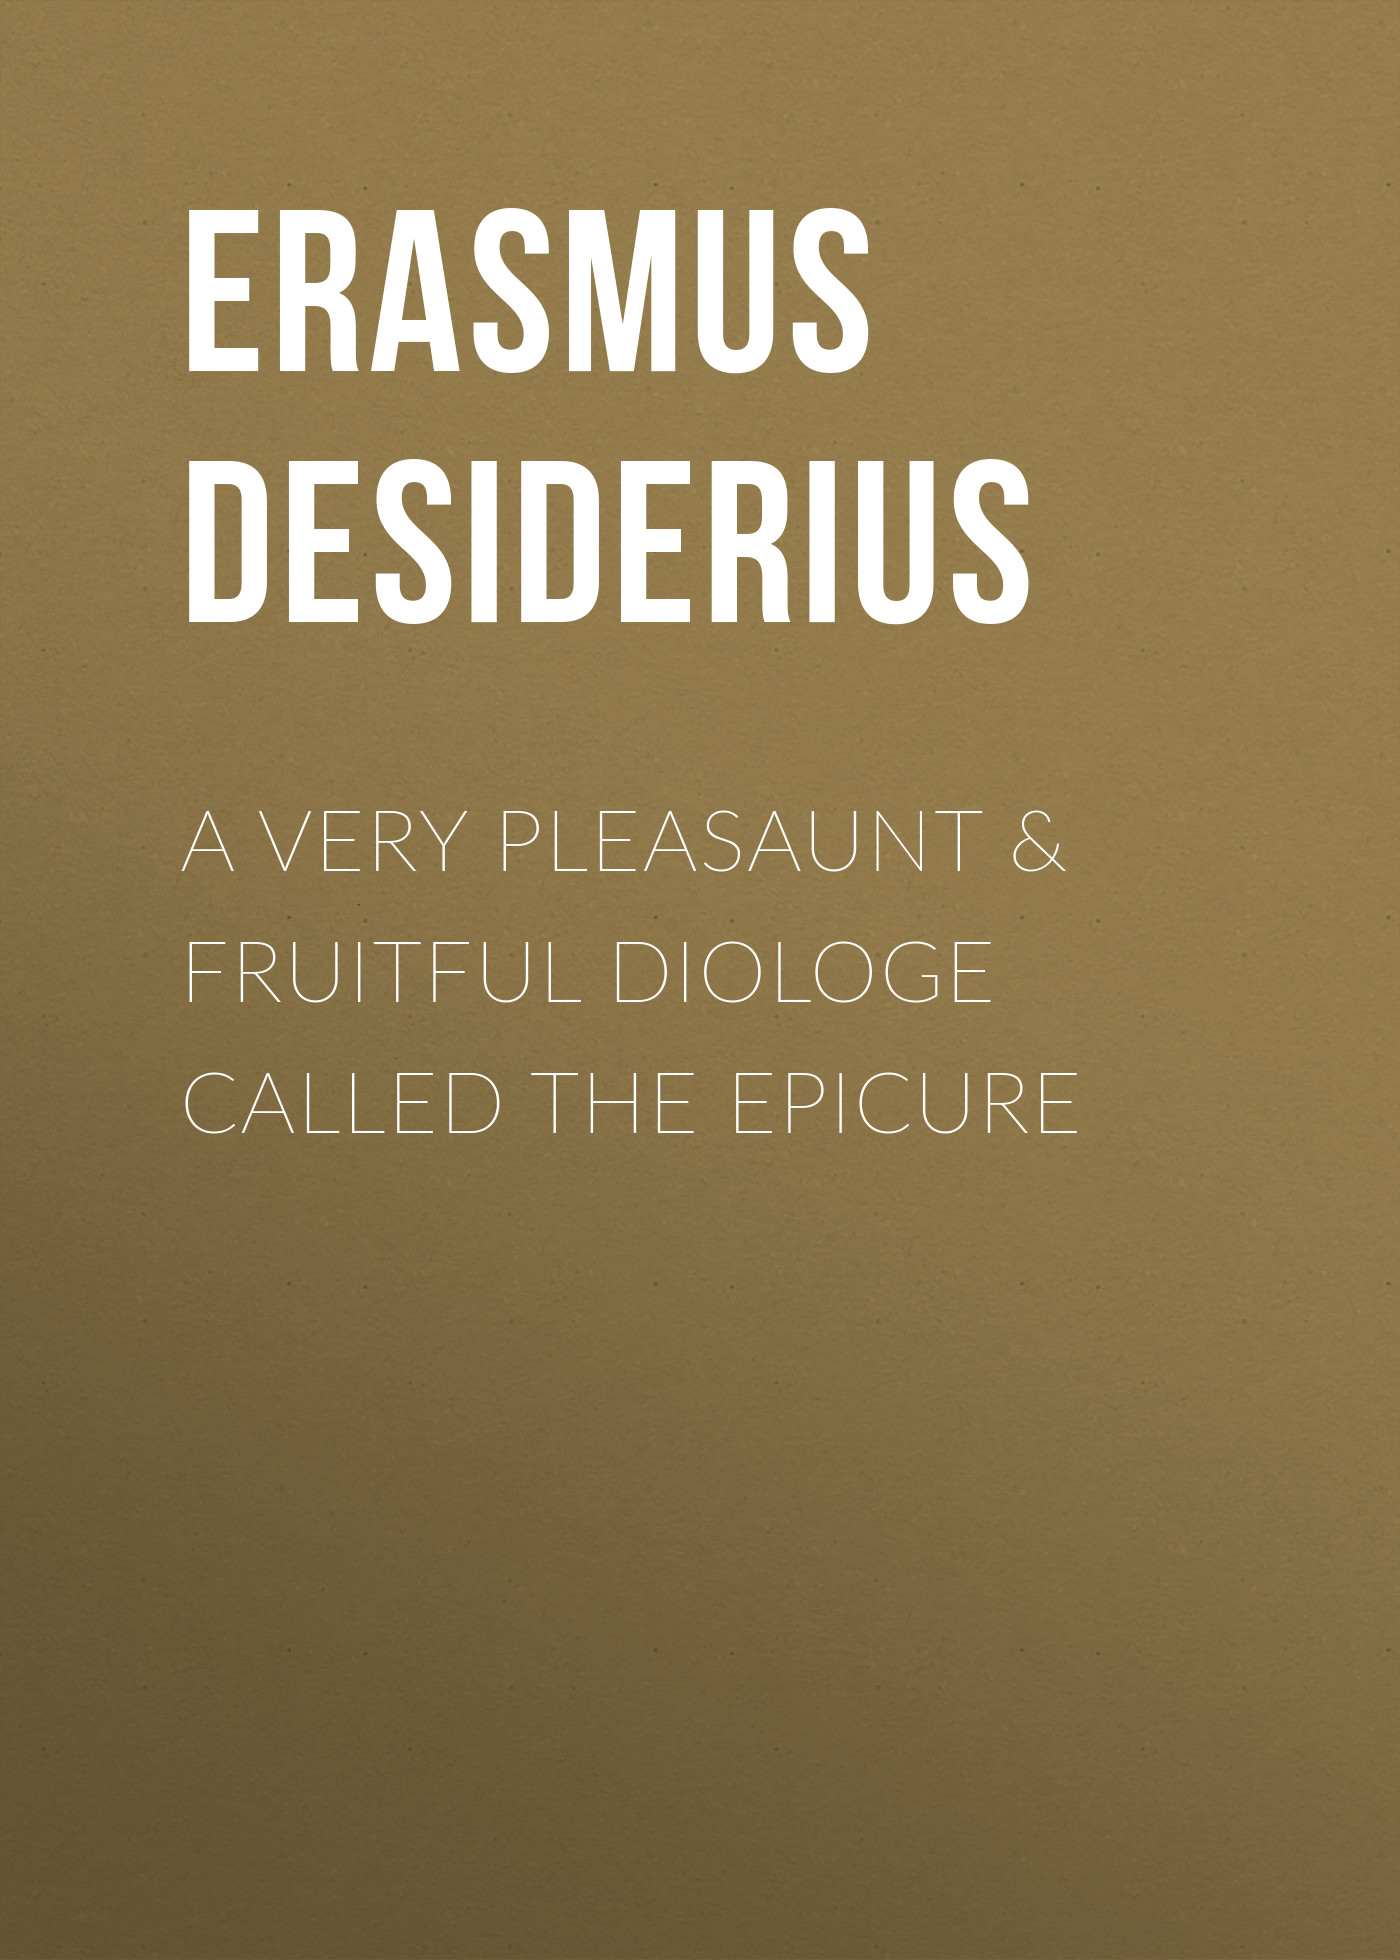 A Very Pleasaunt&Fruitful Diologe Called the Epicure